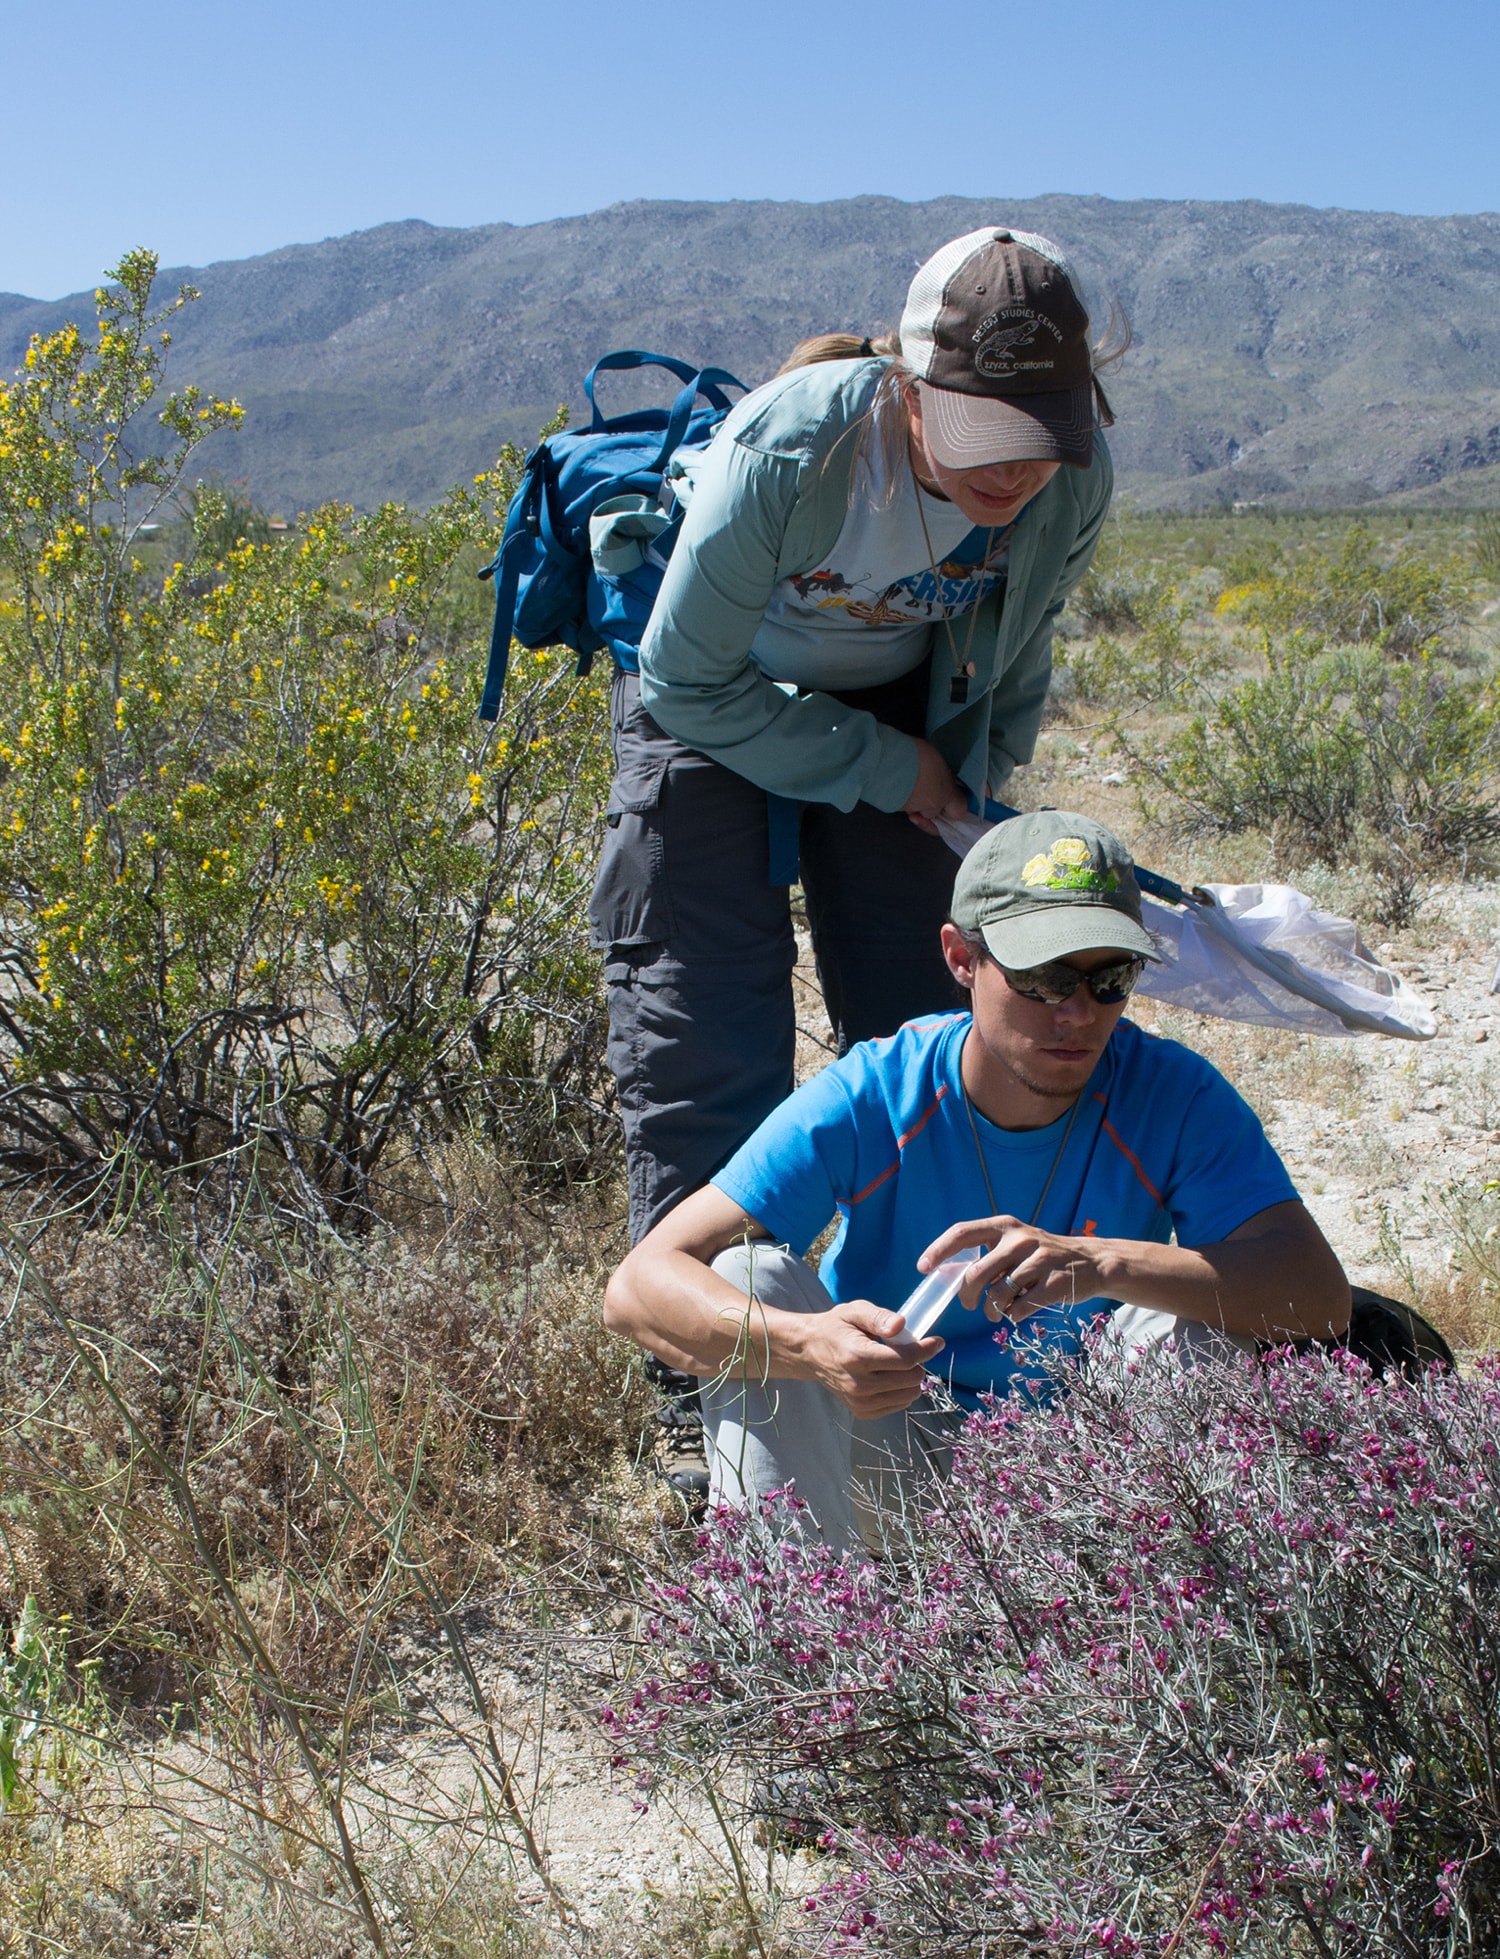 Where To Find Wildflowers? Experts Weigh In